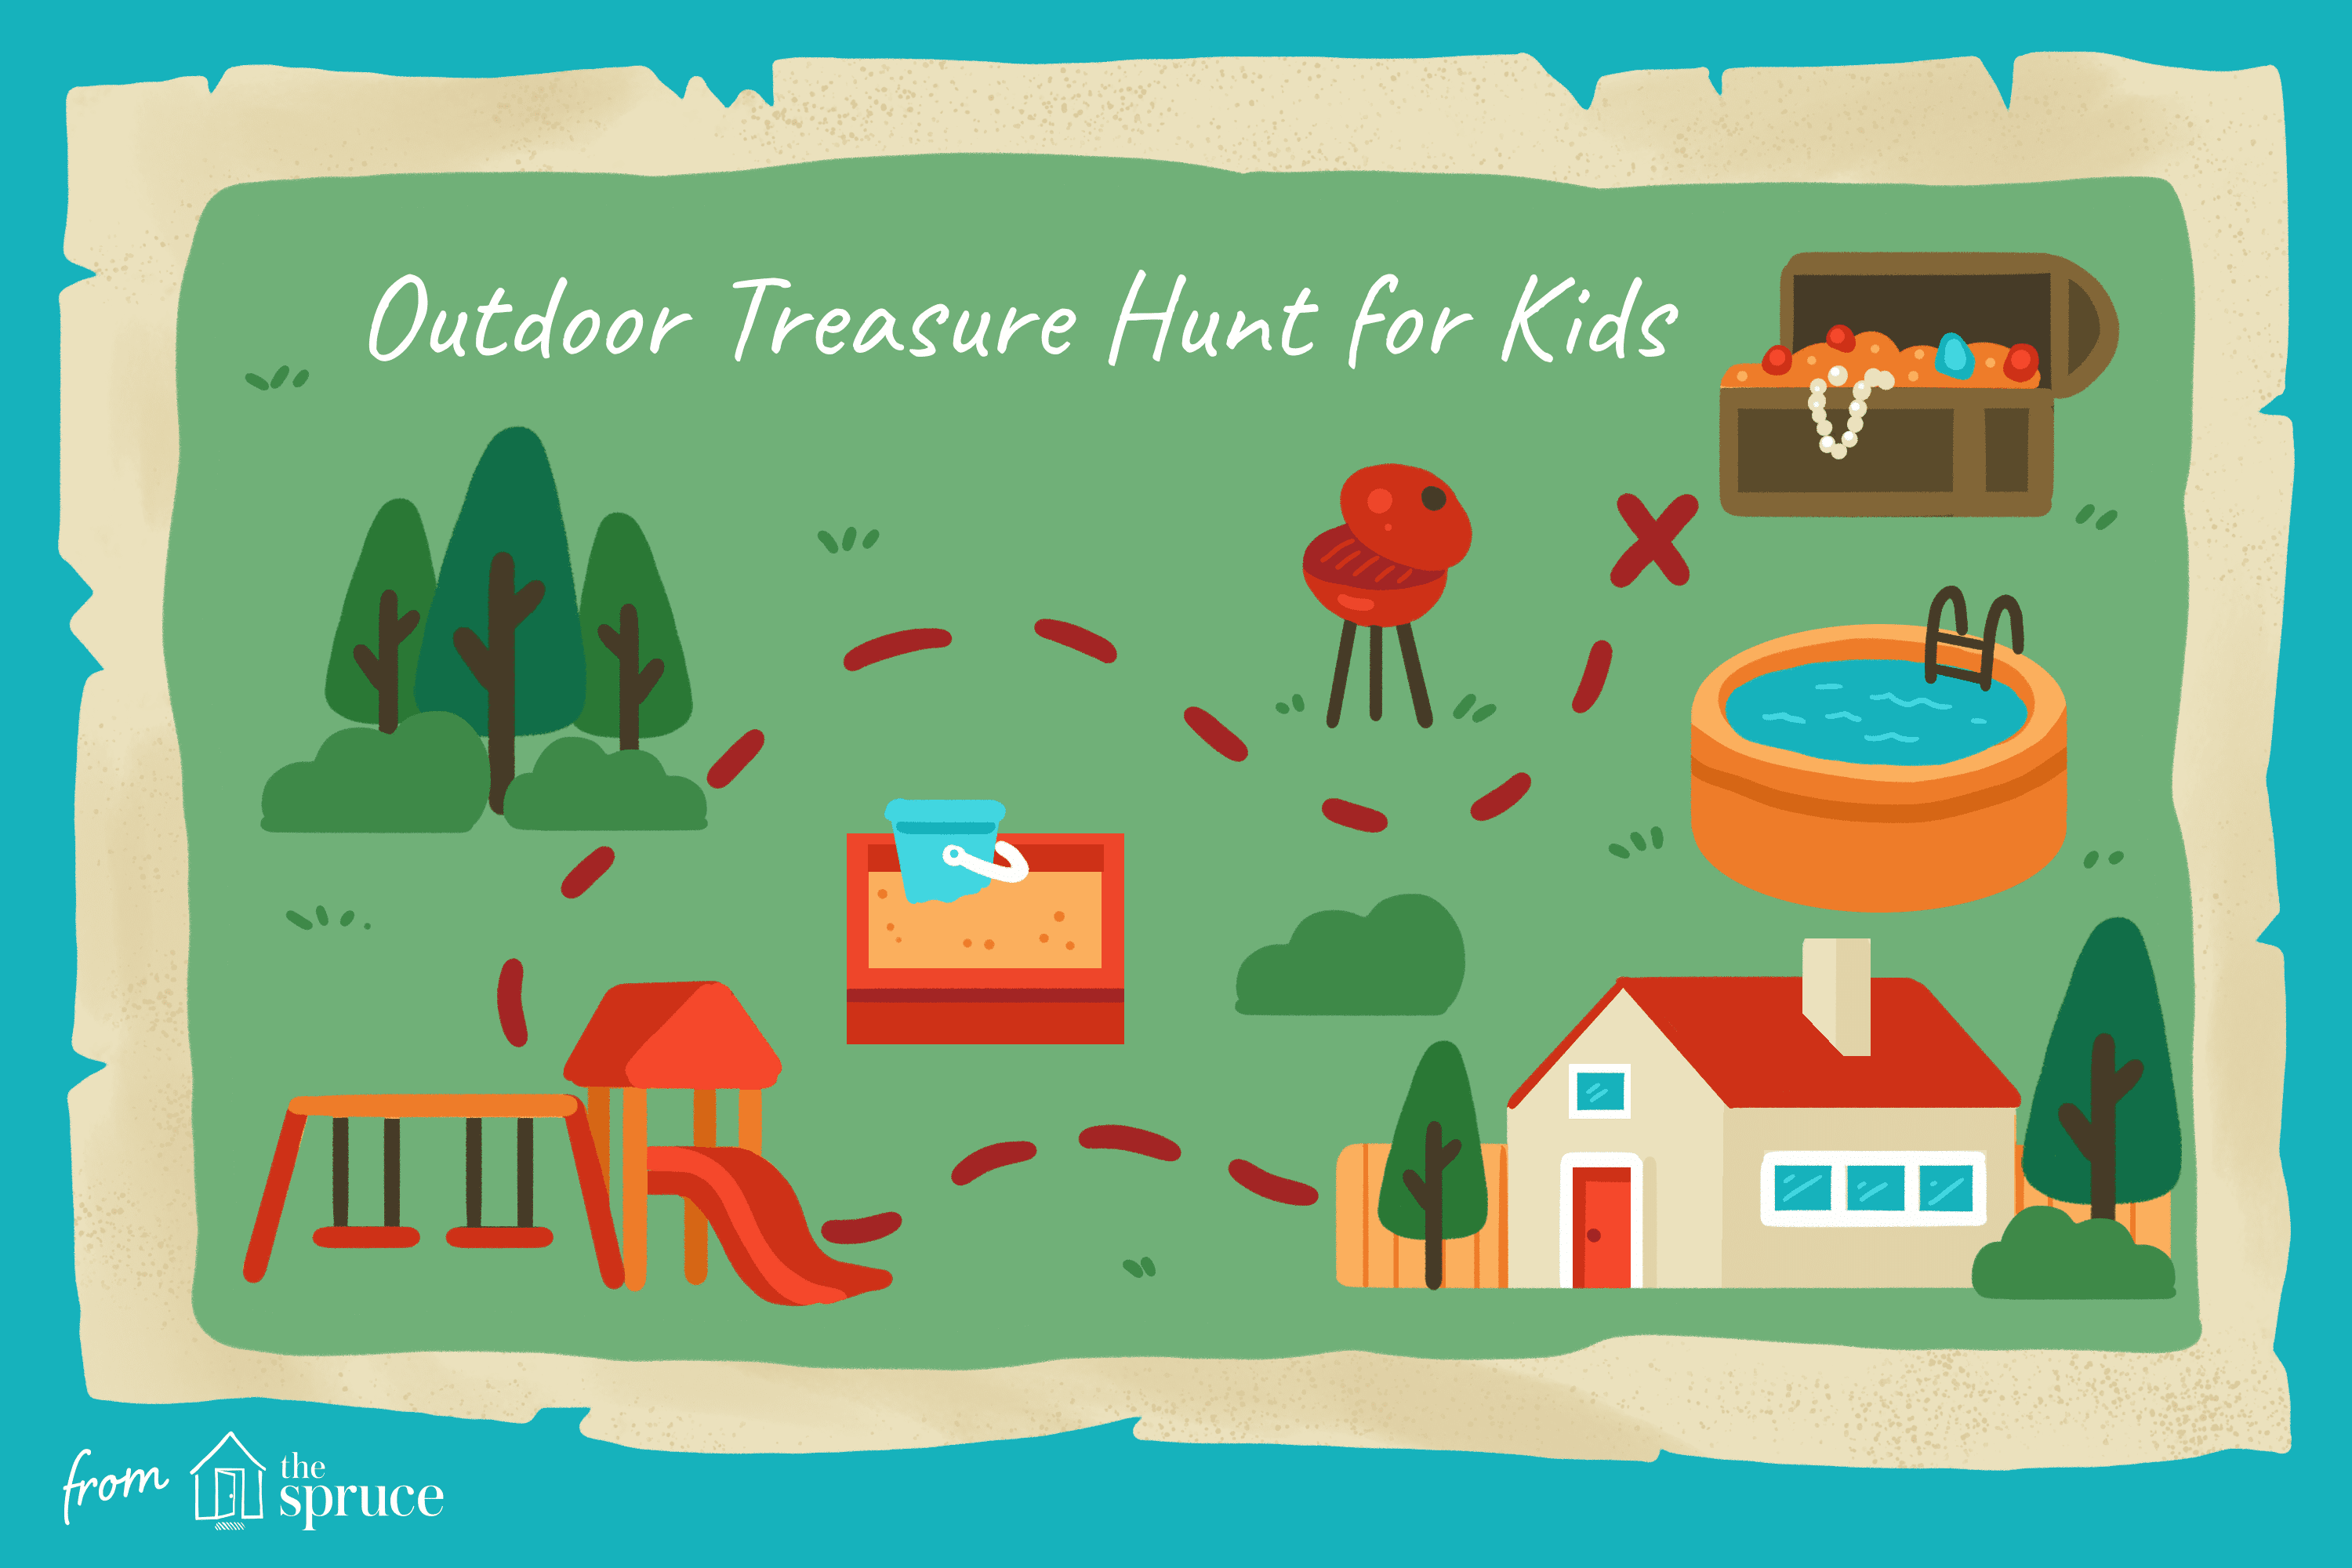 planning-a-kids-treasure-hunt-around-your-managed-community